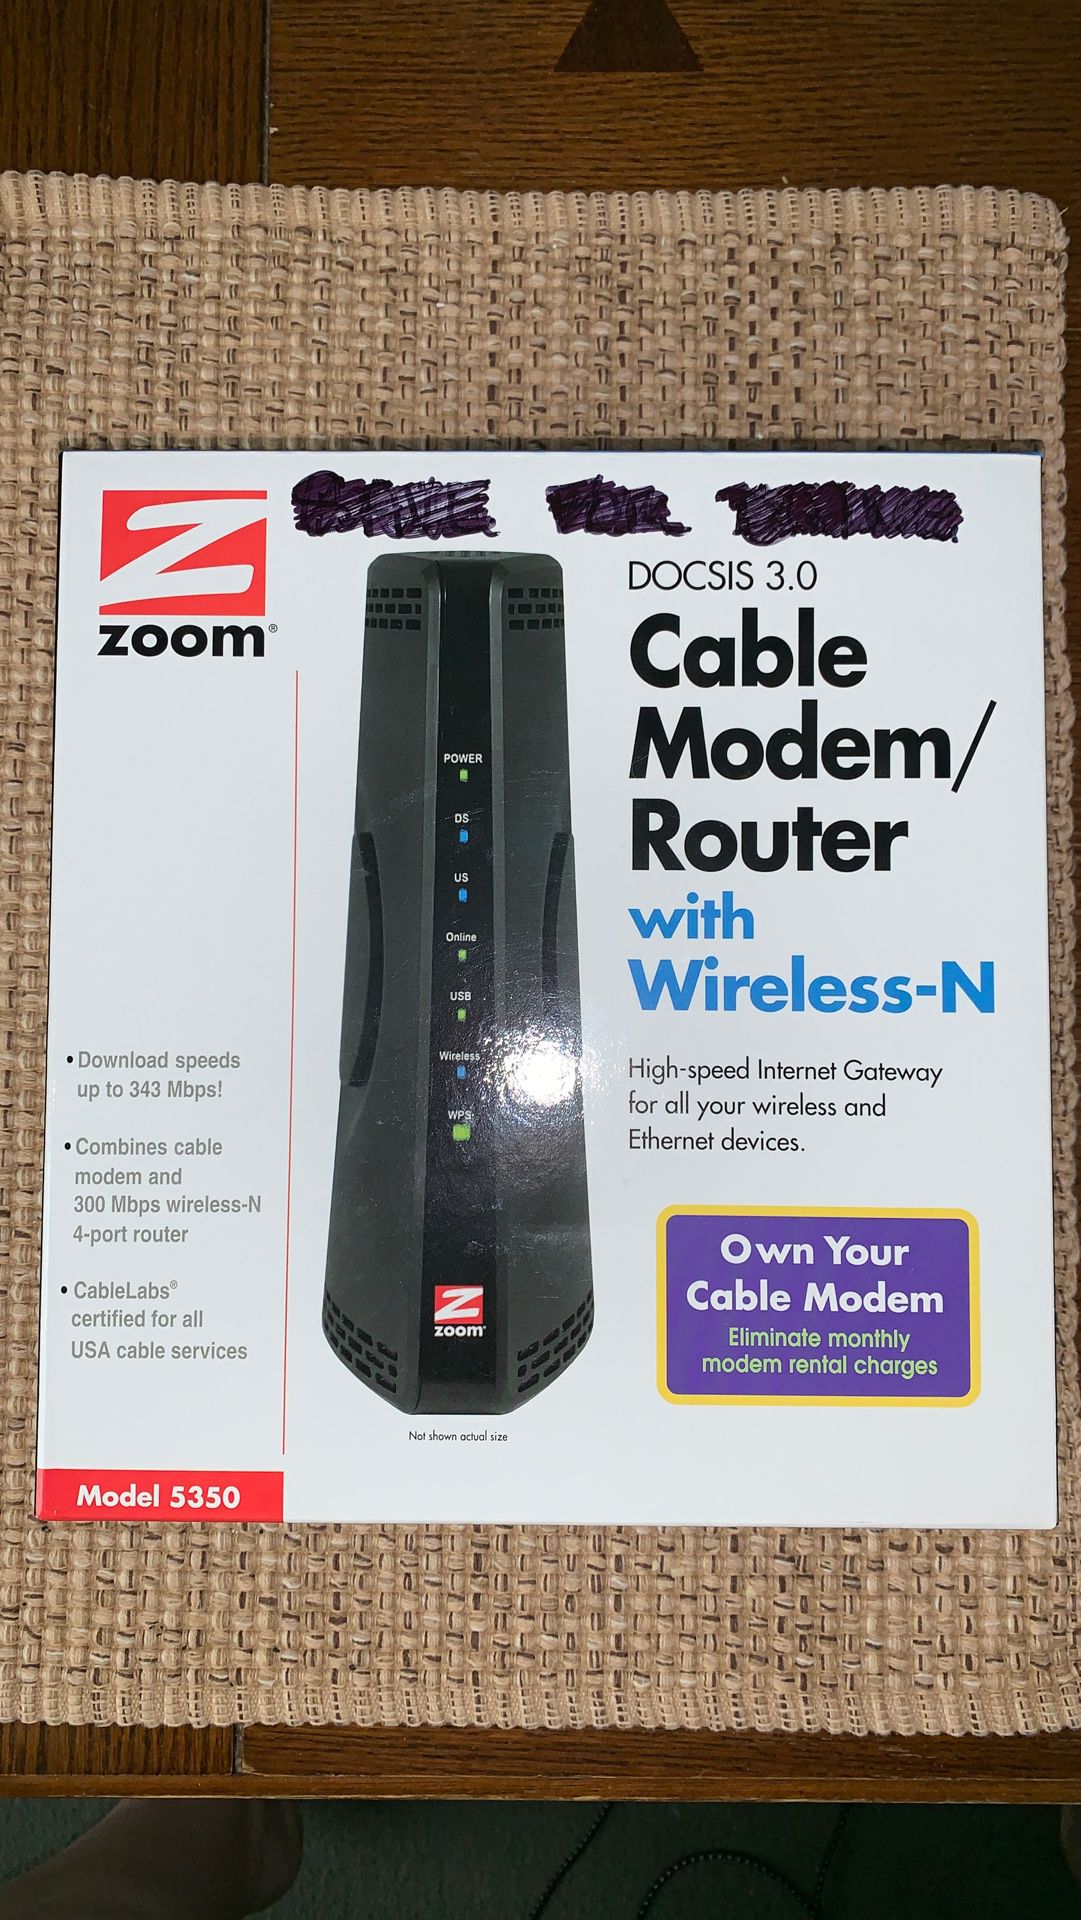 Zoom DOCSIS 3.0 Wireless N Cable Modem Router Model 5350 Like New